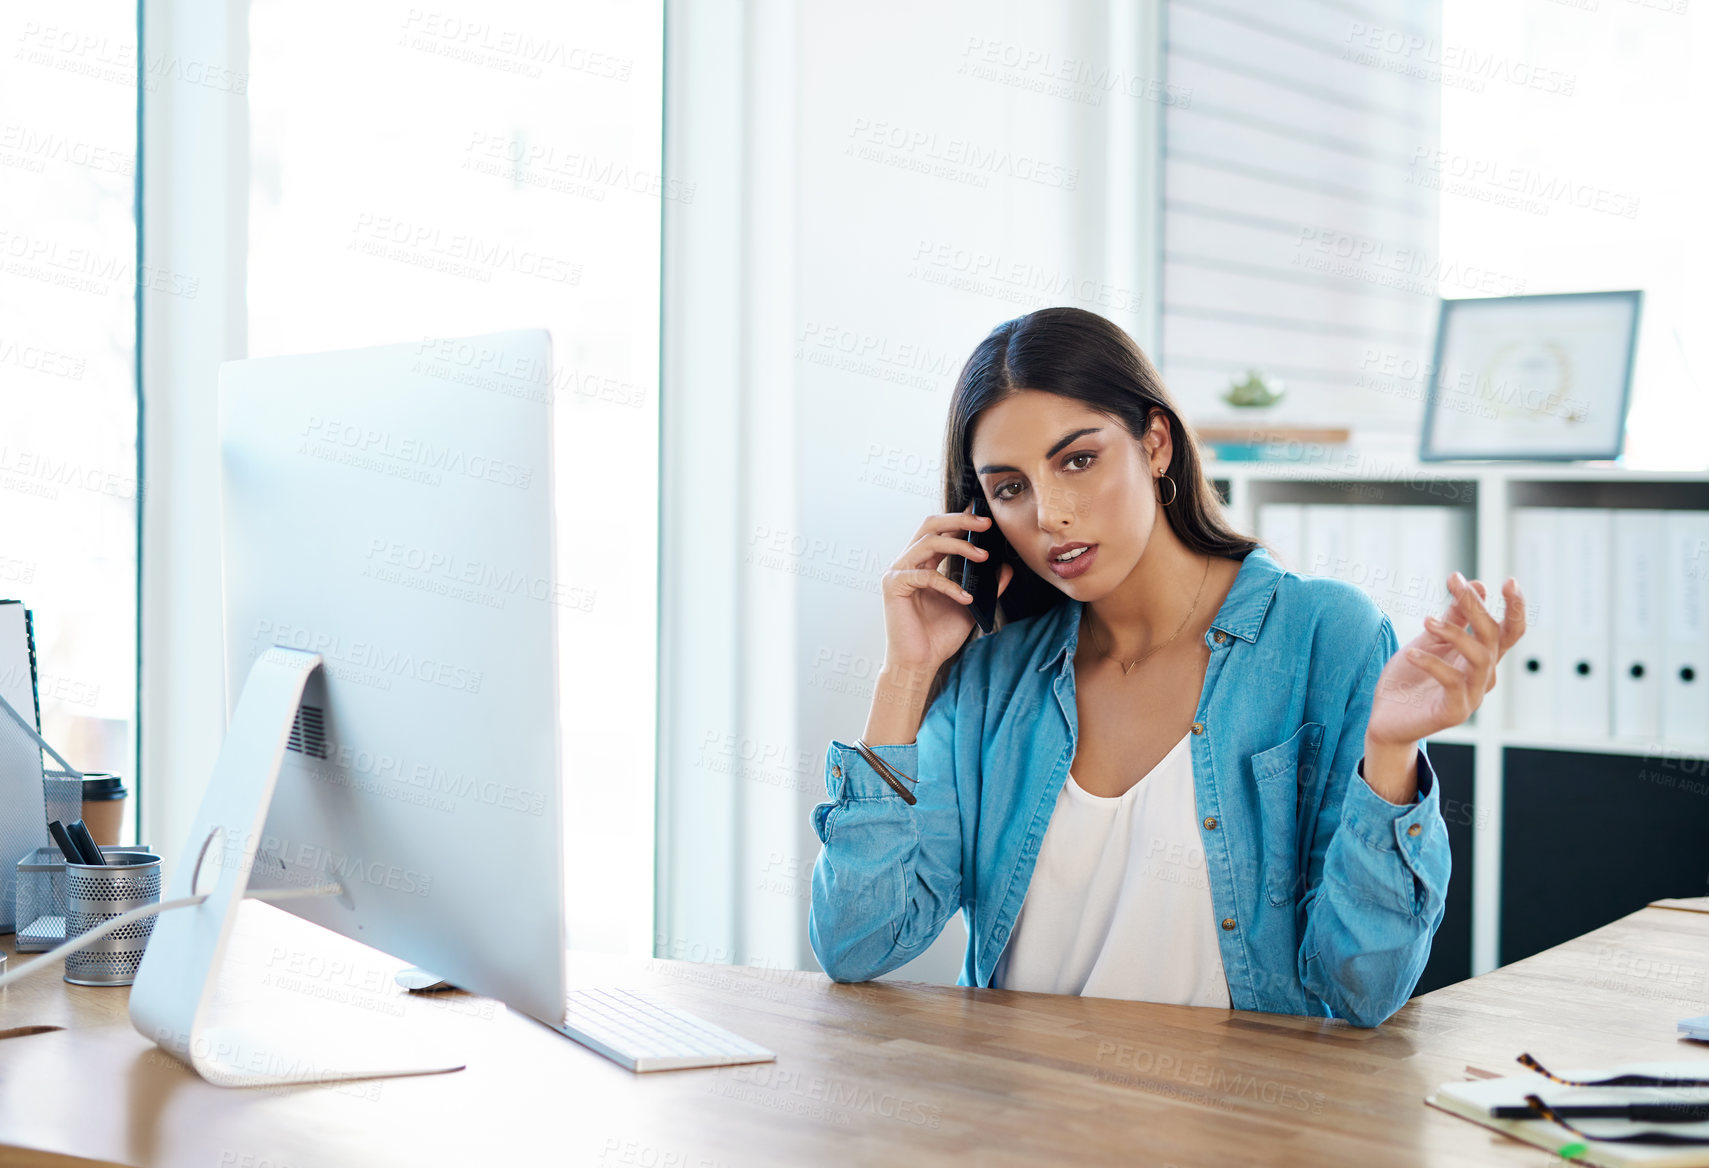 Buy stock photo Shot of a young businesswoman talking on a cellphone while working on a computer in an office